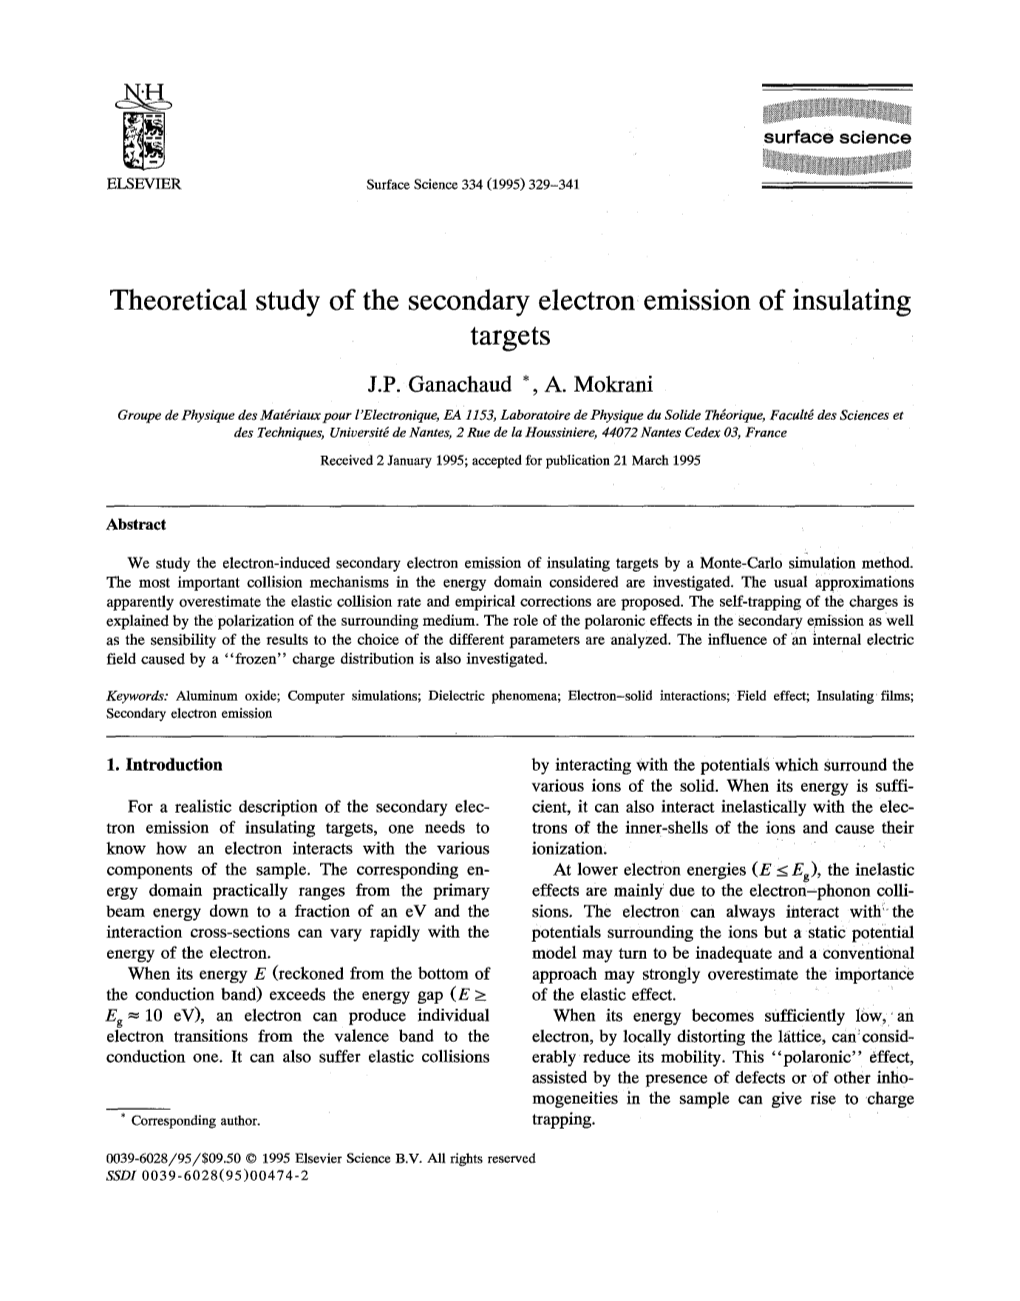 Theoretical Study of the Secondary Electron Emission of Insulating Targets